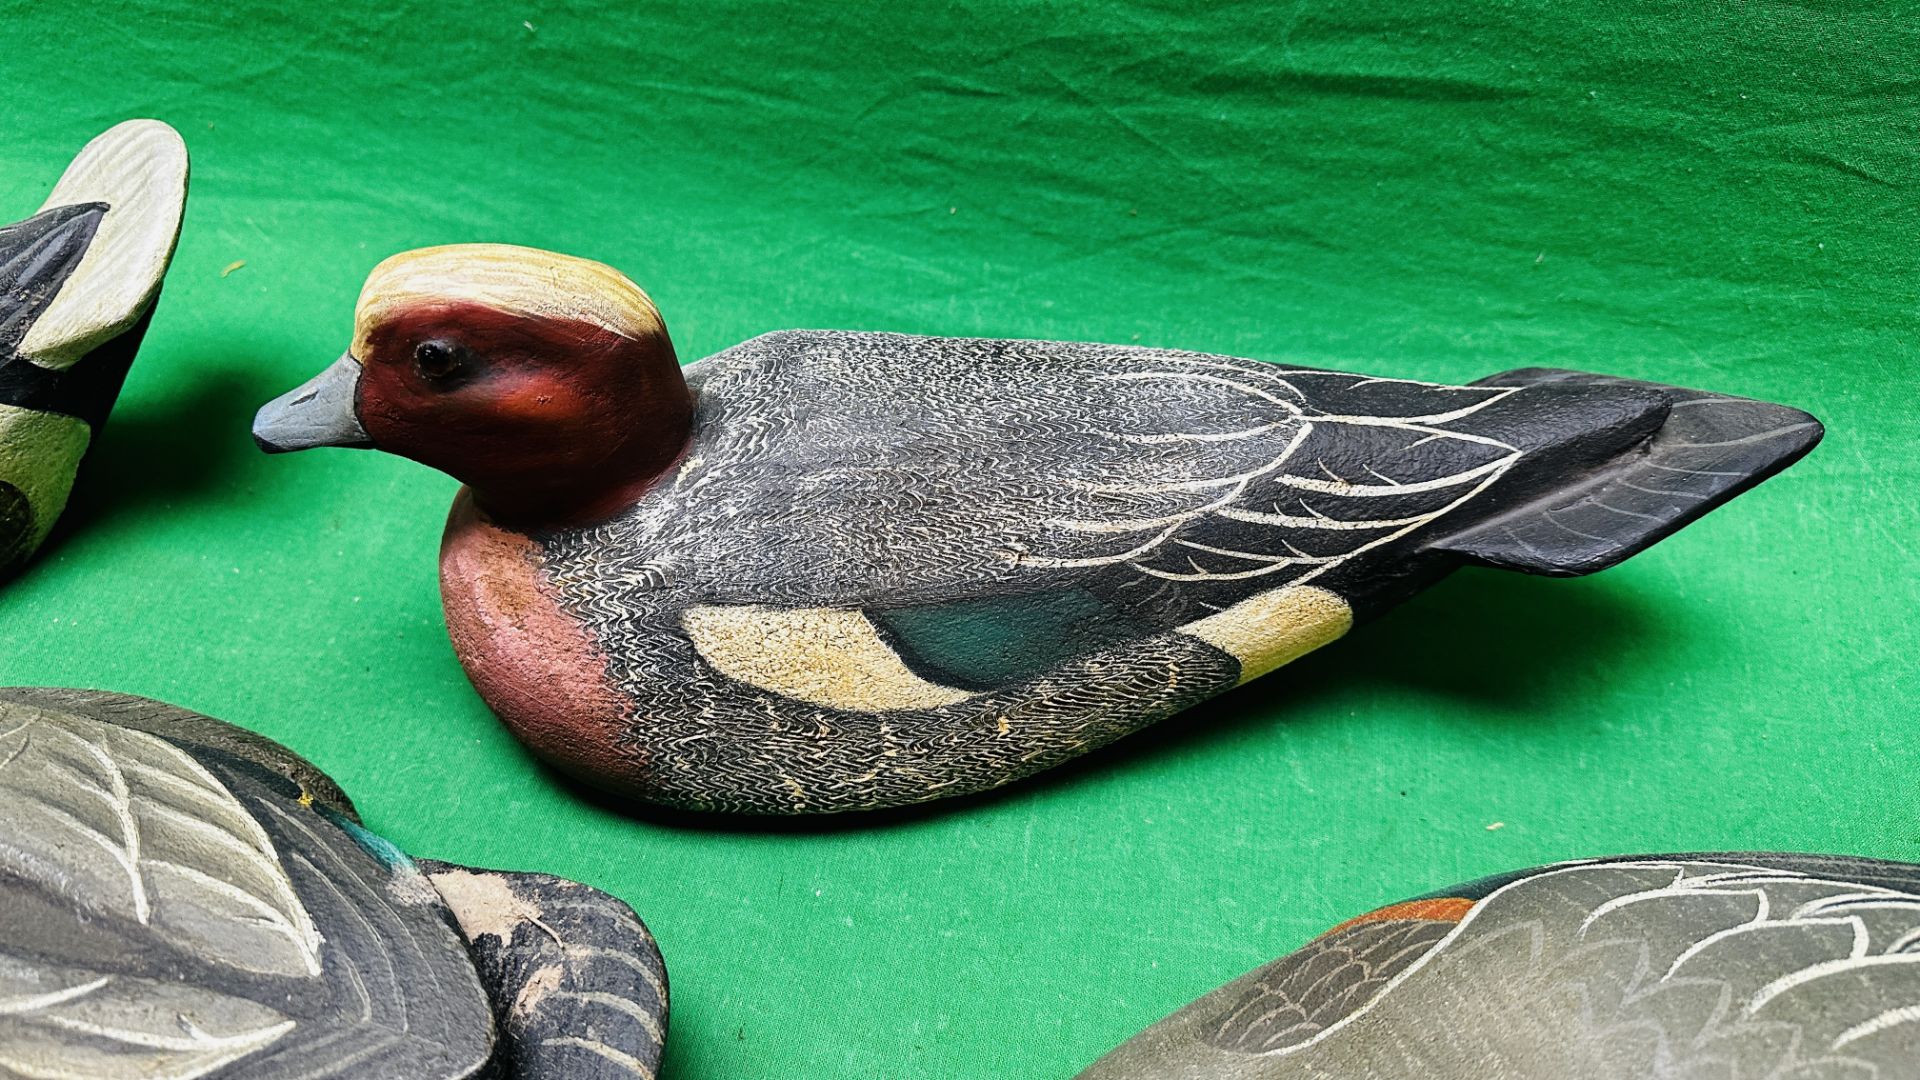 A HANDCRAFTED SET OF 4 DUCK DECOYS HAVING HANDPAINTED DETAIL AND GLASS EYES. - Image 7 of 13